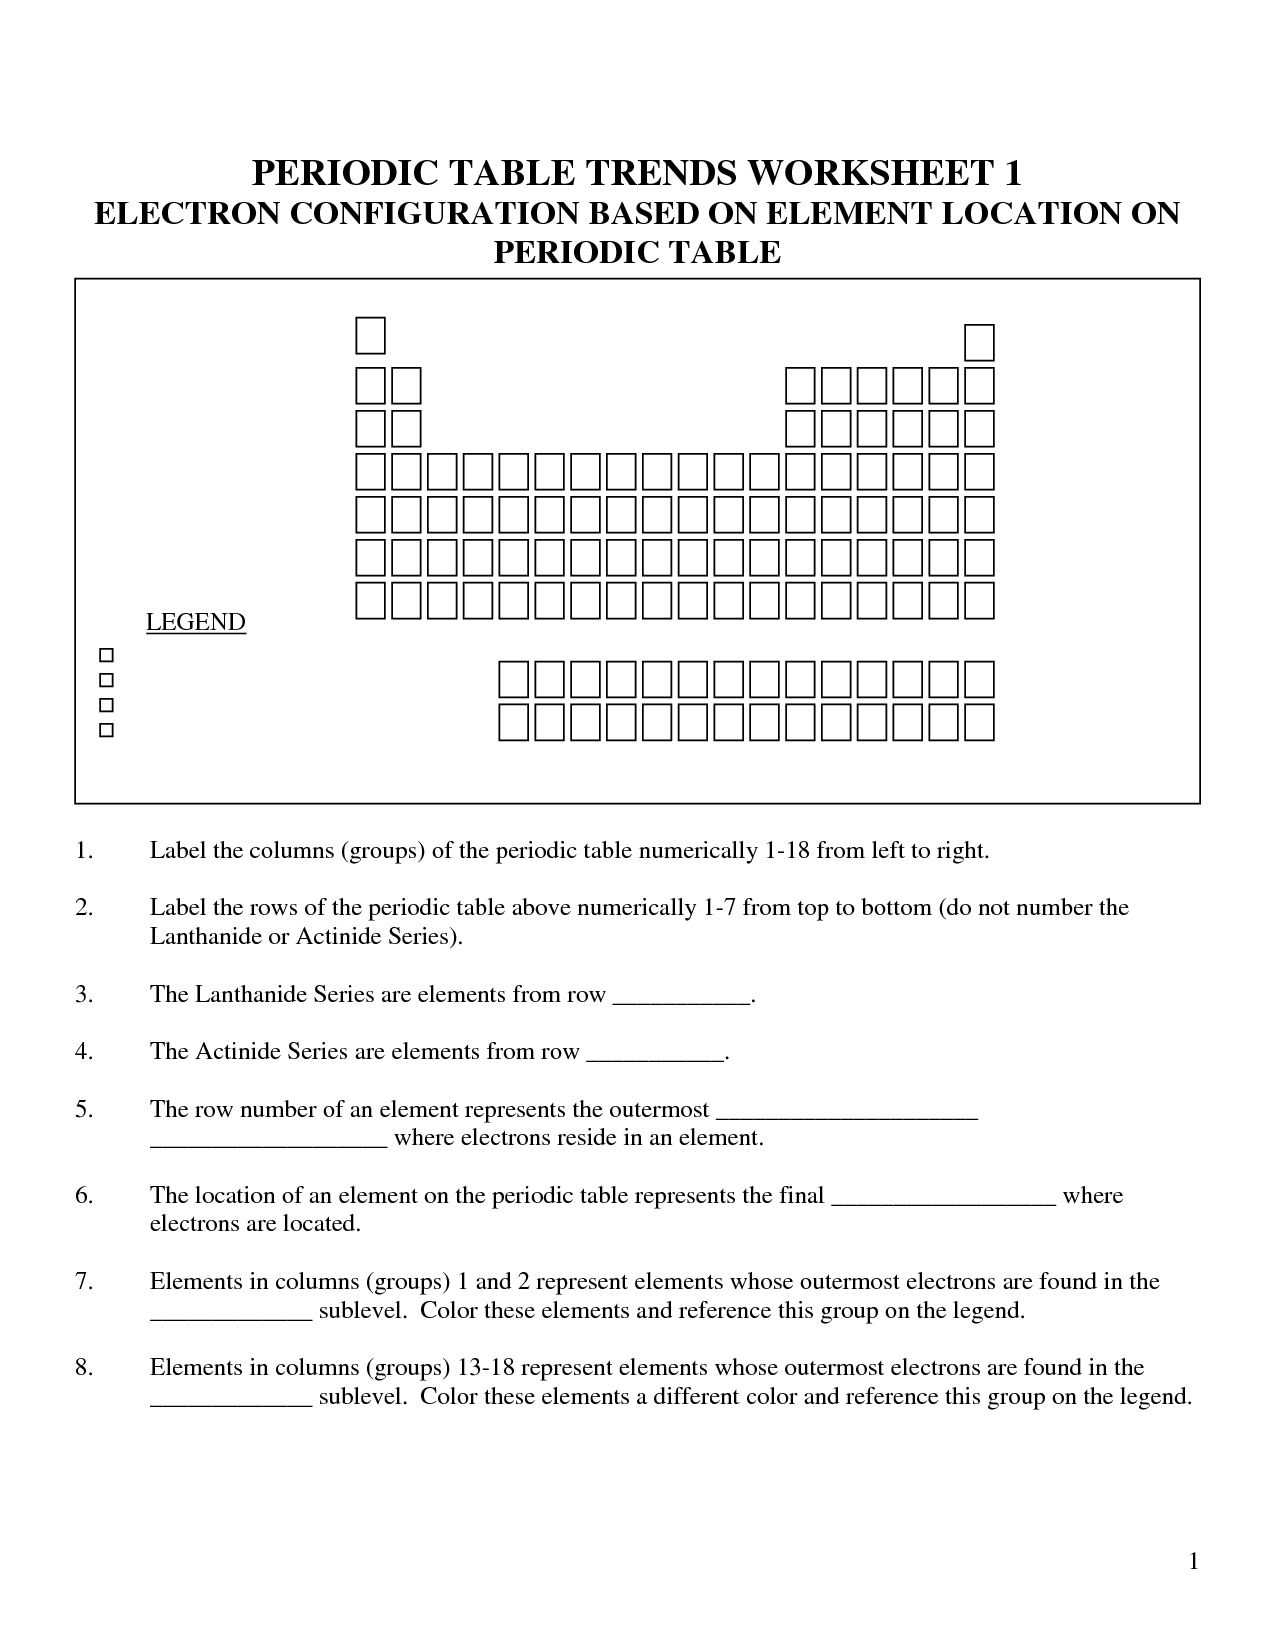 5 Best Images of Branches Of Science Worksheet - Physical Science Branches, Worksheets On Three ...